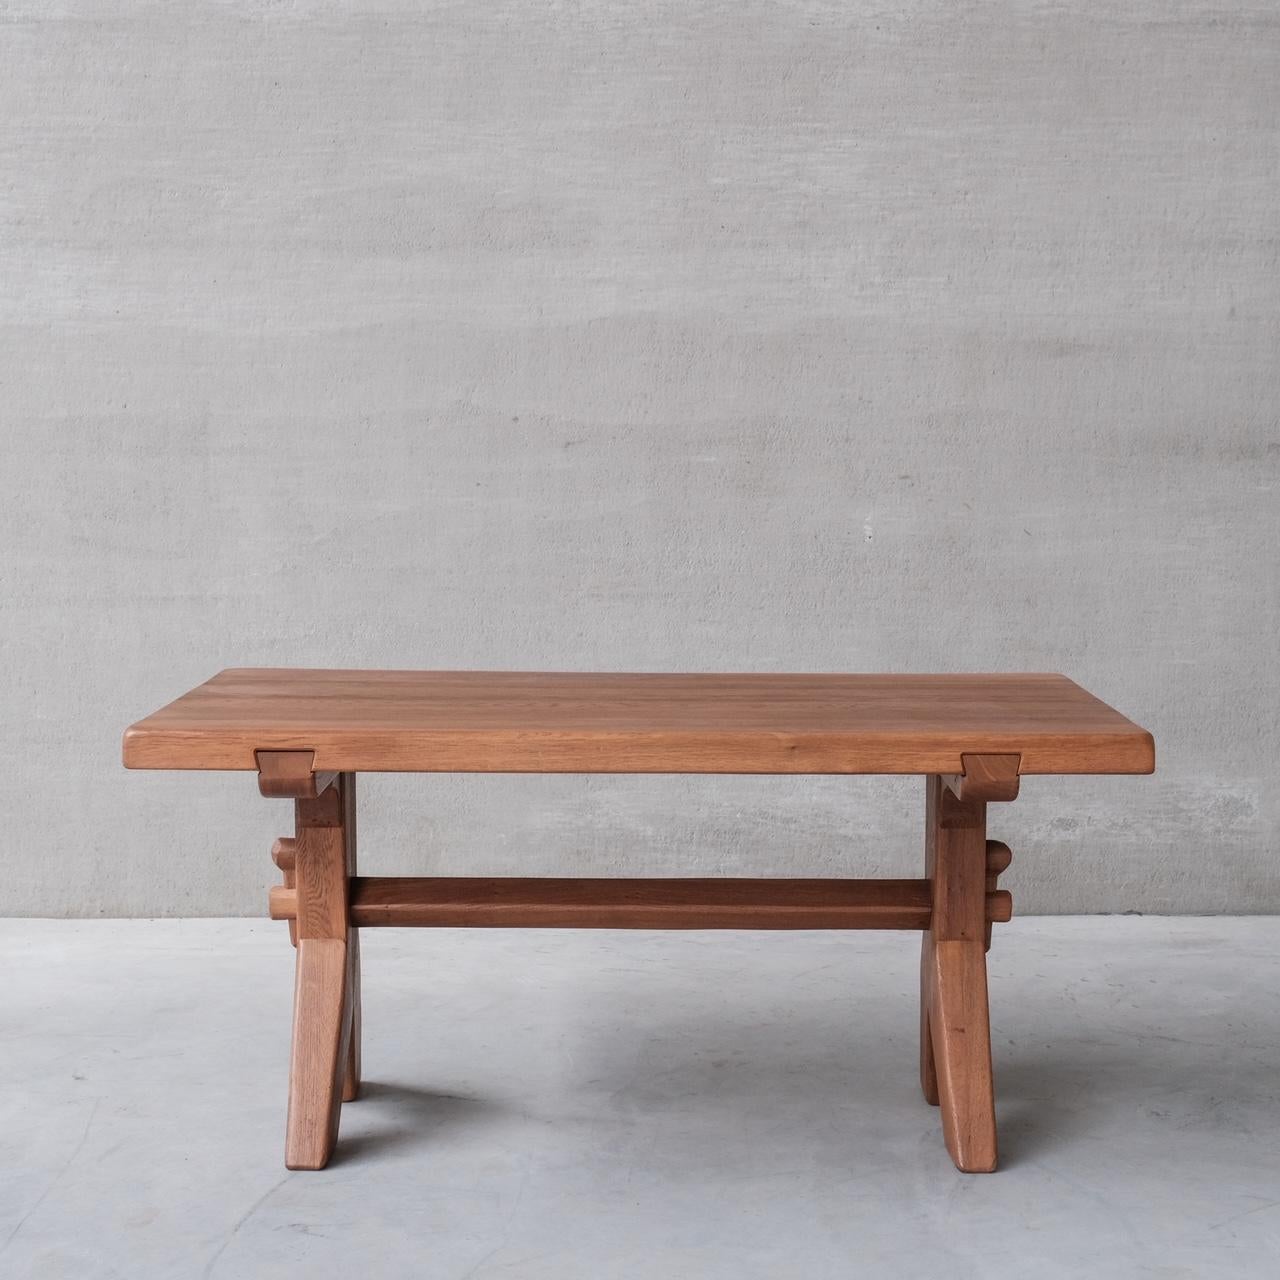 A brutalist dining table by De Puydt. 

Belgium, c1970s. 

Solid oak. 

Plenty of character, and exposed joints. 

Some wear commensurate with age, but generally good condition. 

Location: Belgium Gallery. 

Dimensions: 160 W x 84 D x